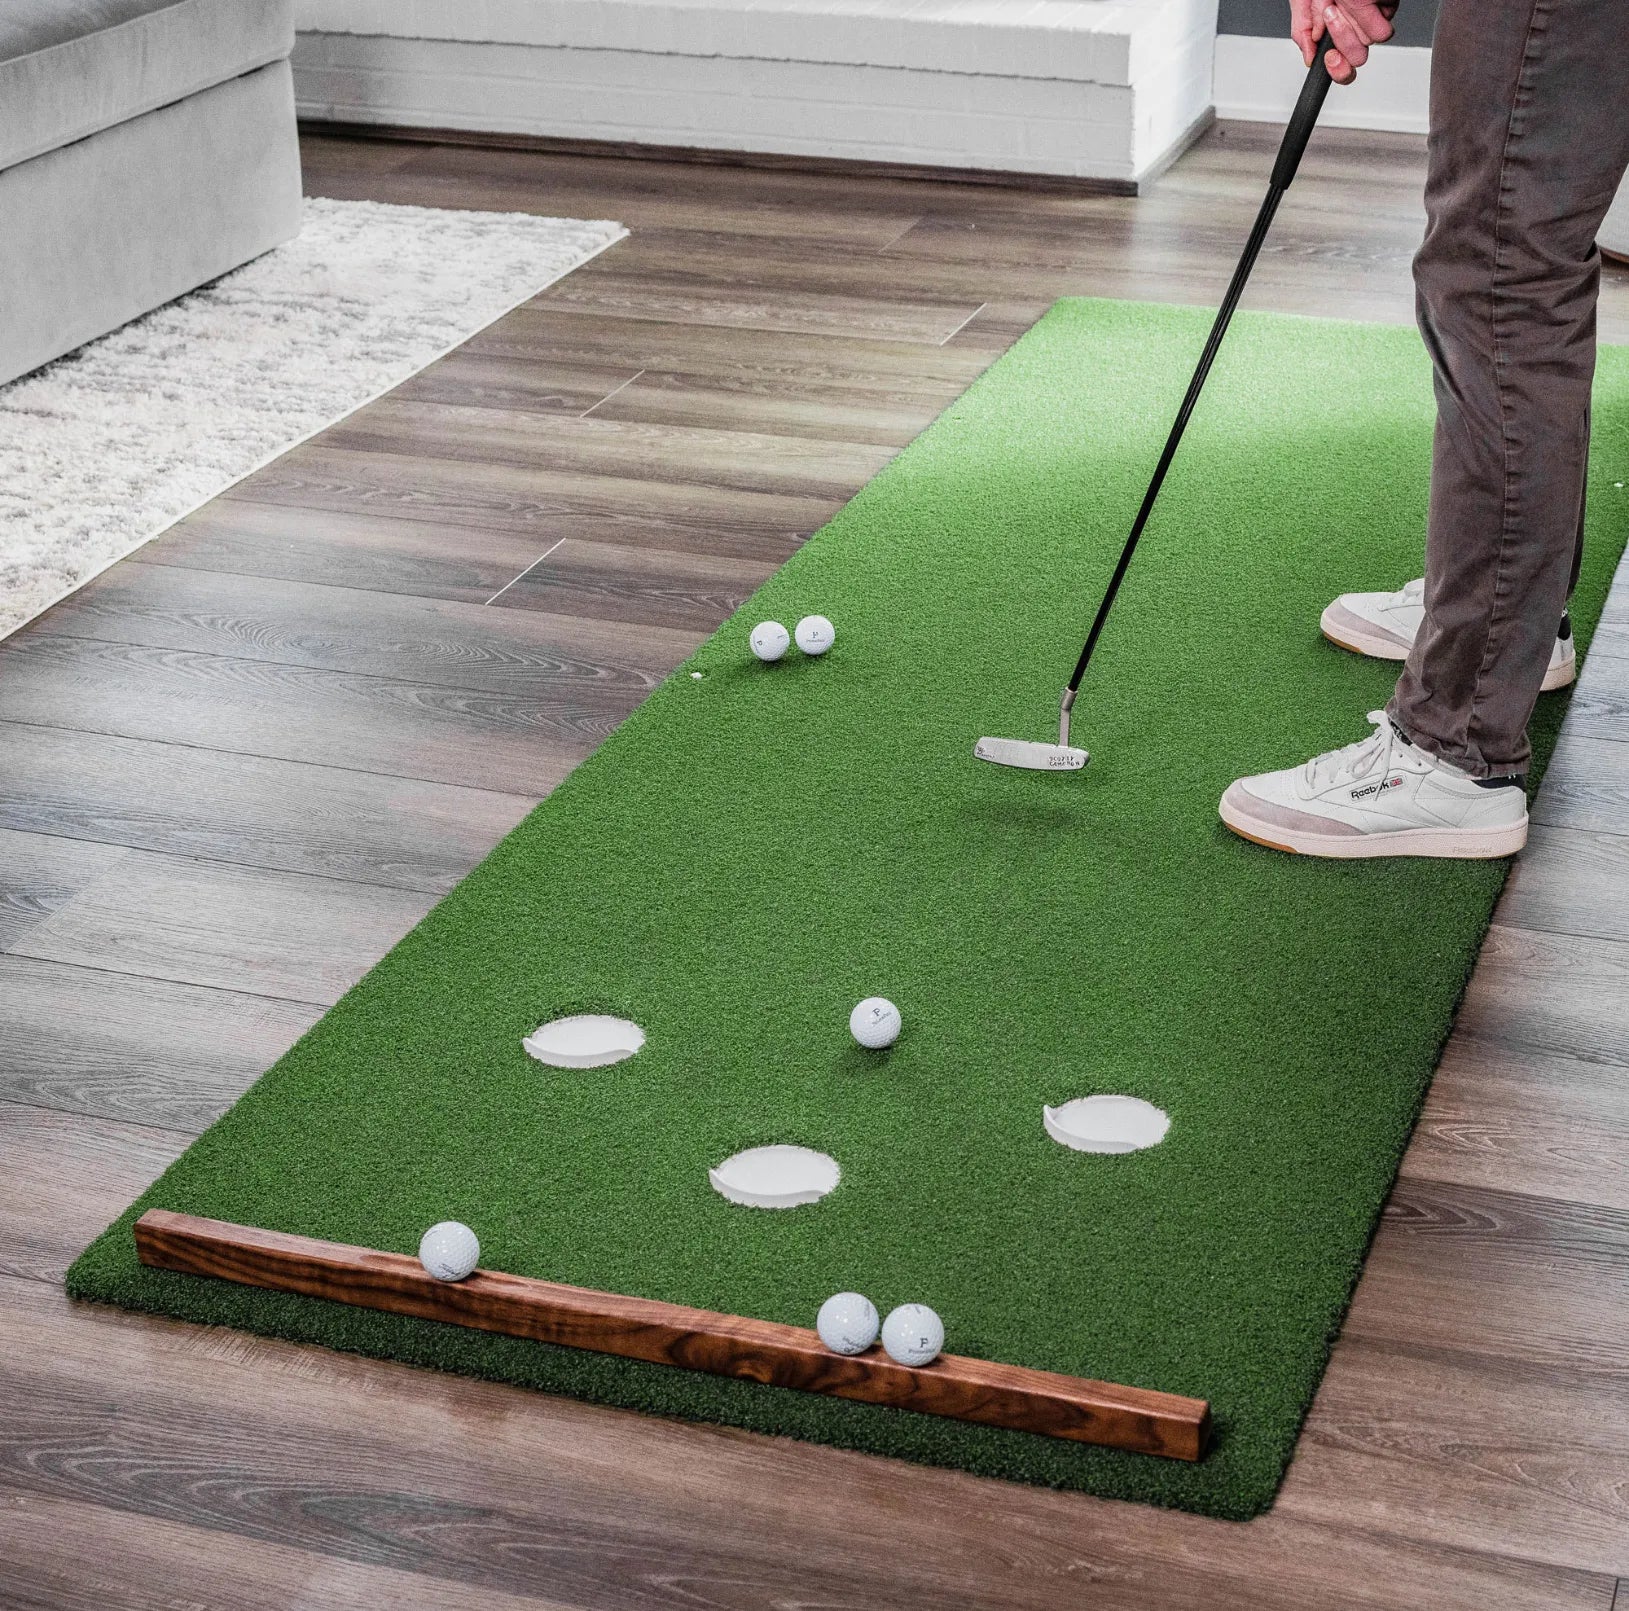 Golf Putting Green, Practice Putting Green Mat, Large Professional Golfing  Training Mat for Indoor Outdoor…